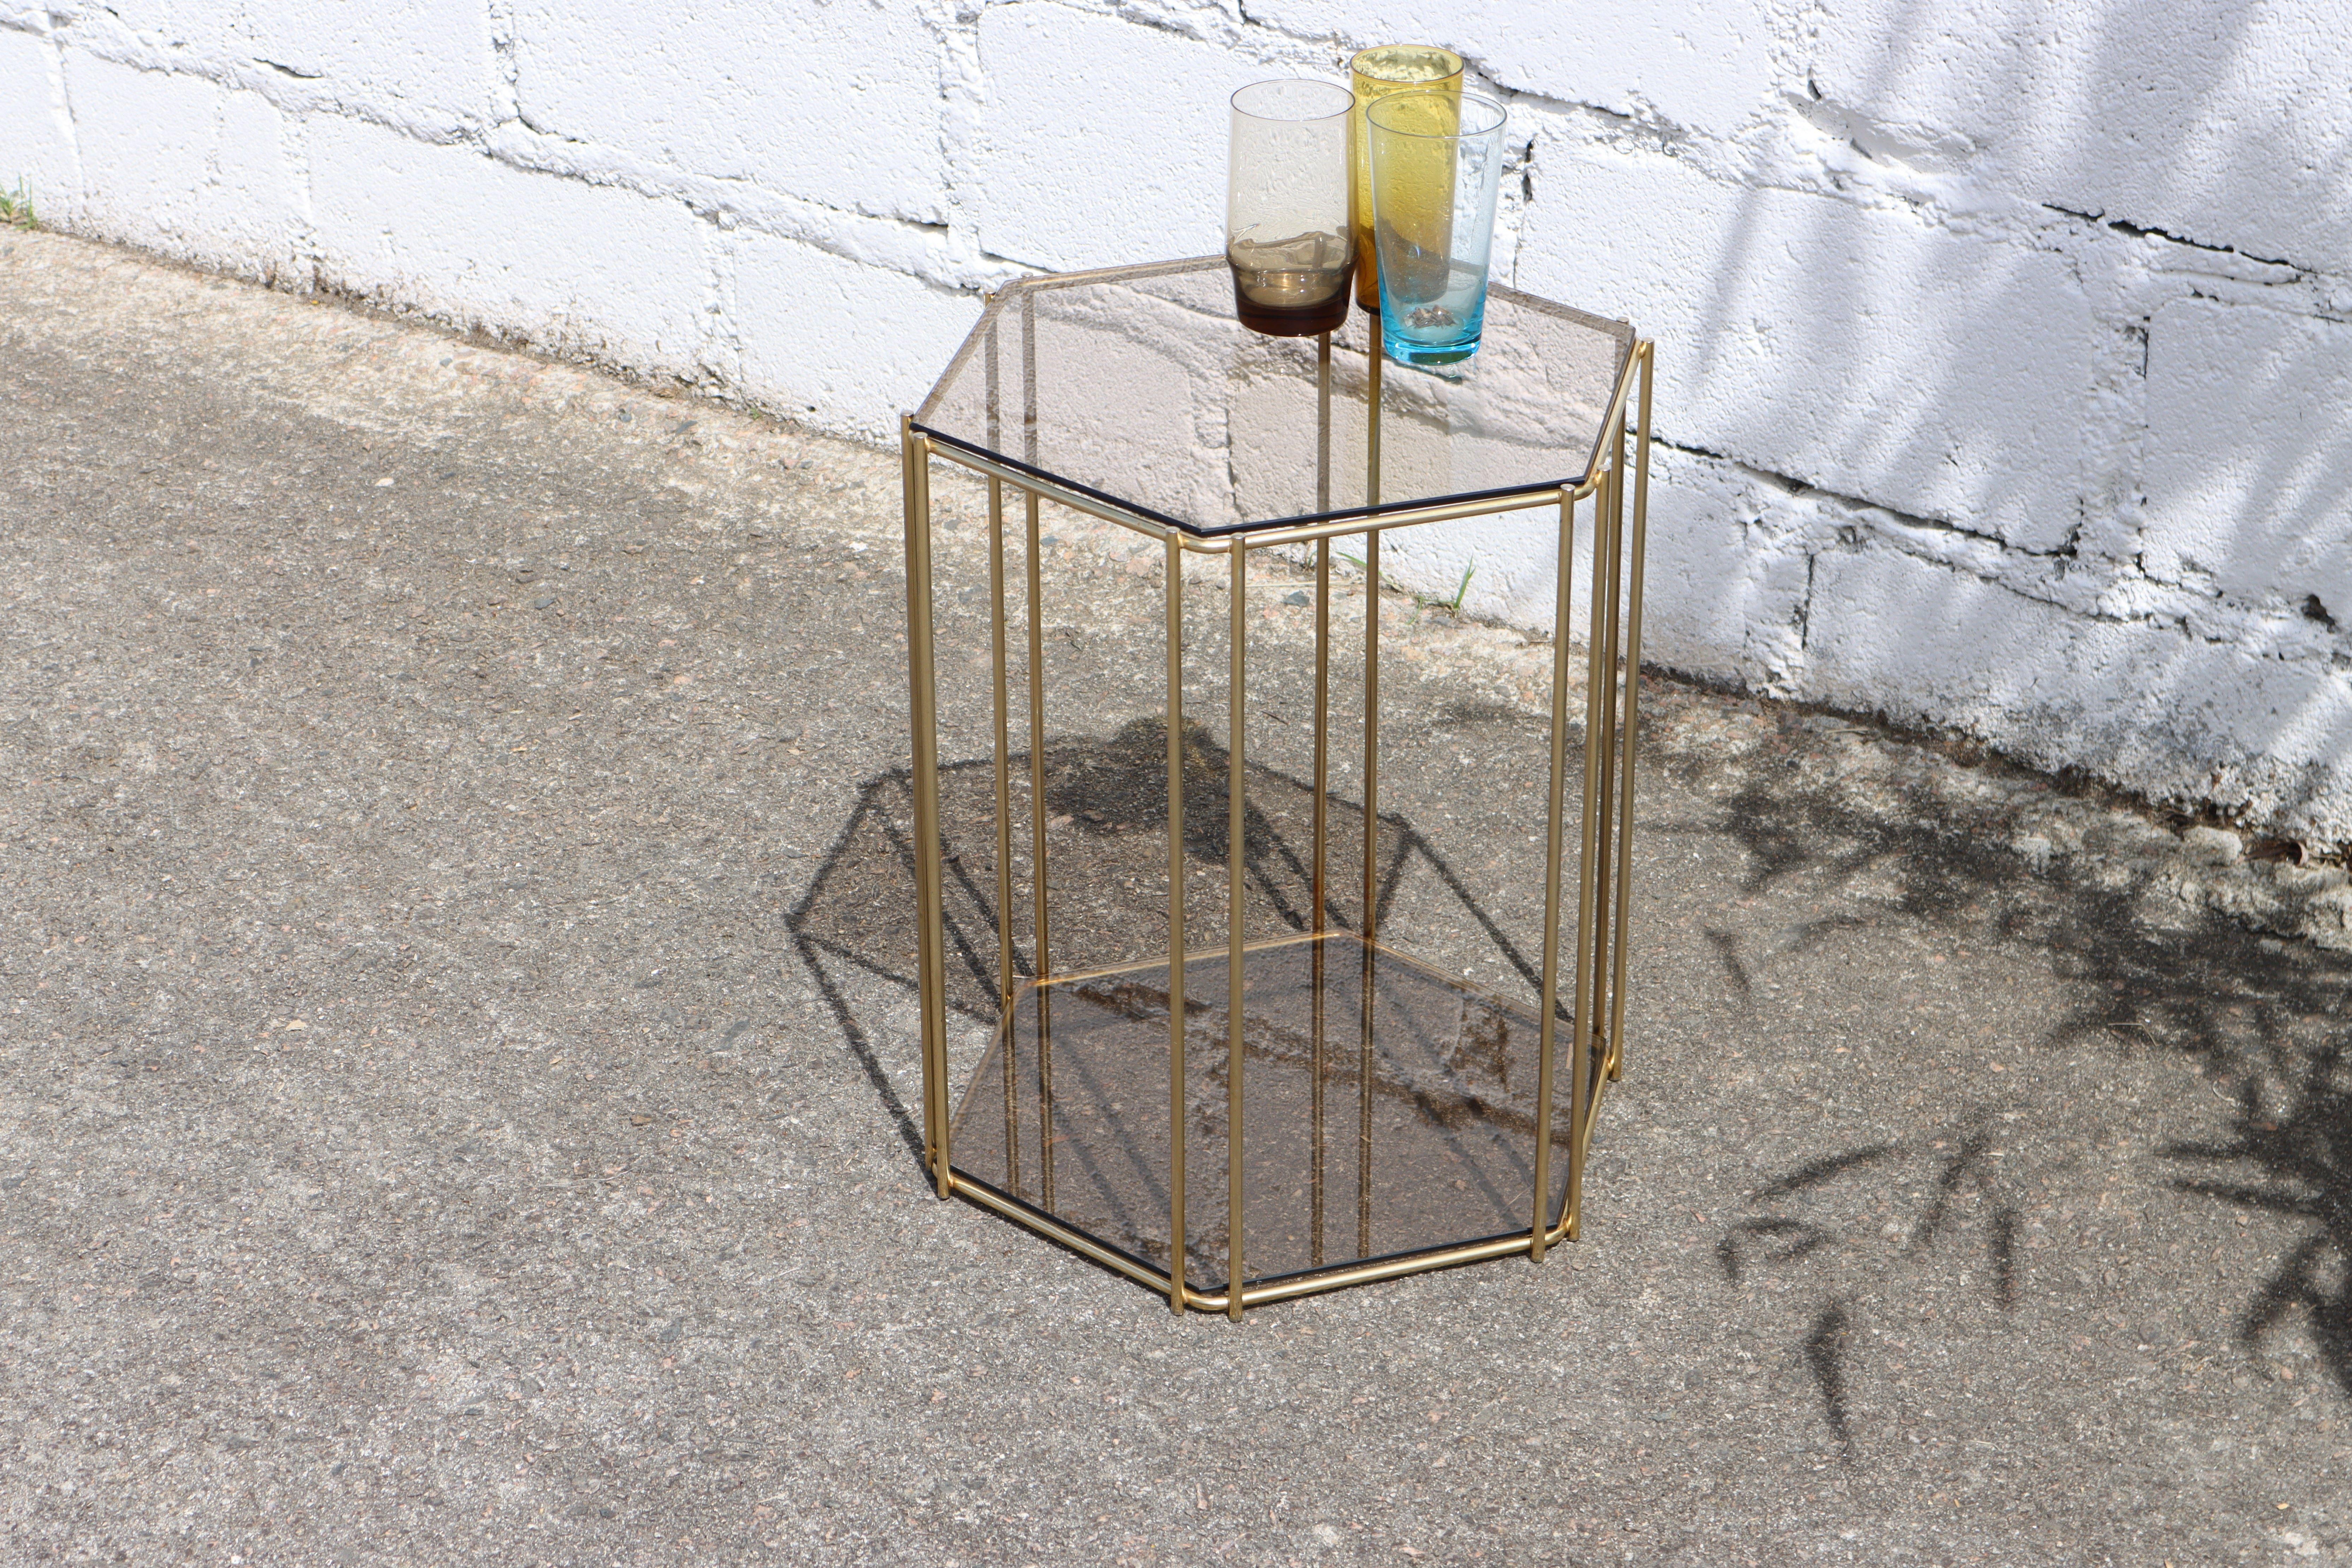 French Vintage Hexagonal smoked Glass & Brass Two Tier Console-Two Tier Lounge Glass Bar-End Table-Hollywood Regency Style-70s
Functional versatile Console with solid gold anodized Steel Frame in an elegant Shape.
2 hexagonal smoked Glass table